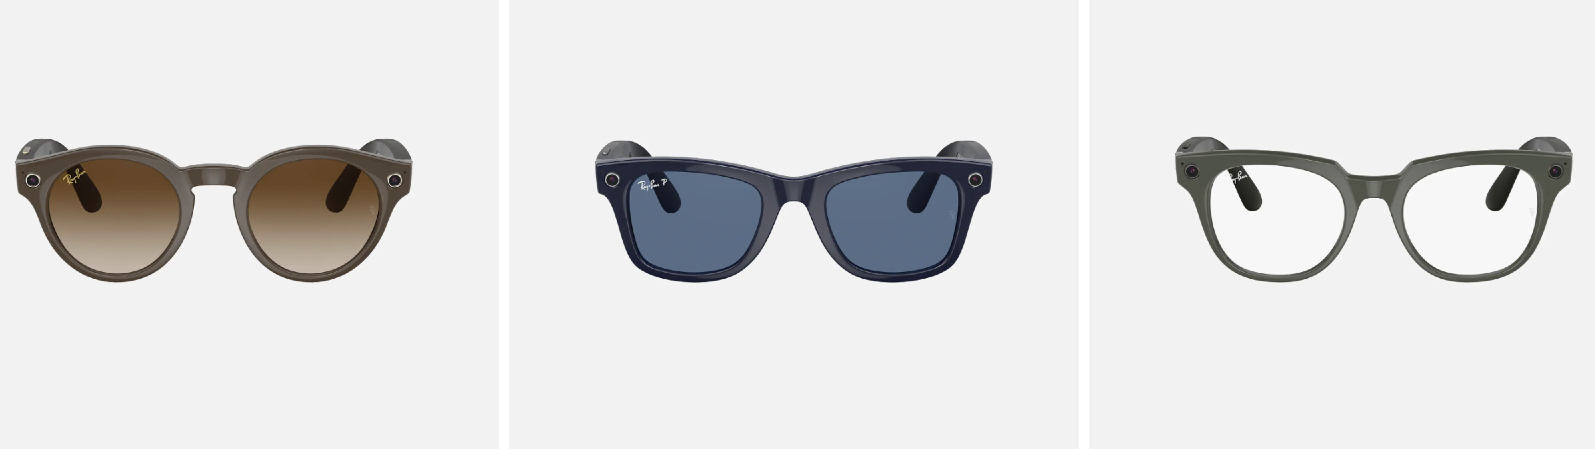 RayBan sunglasses with embedded camera